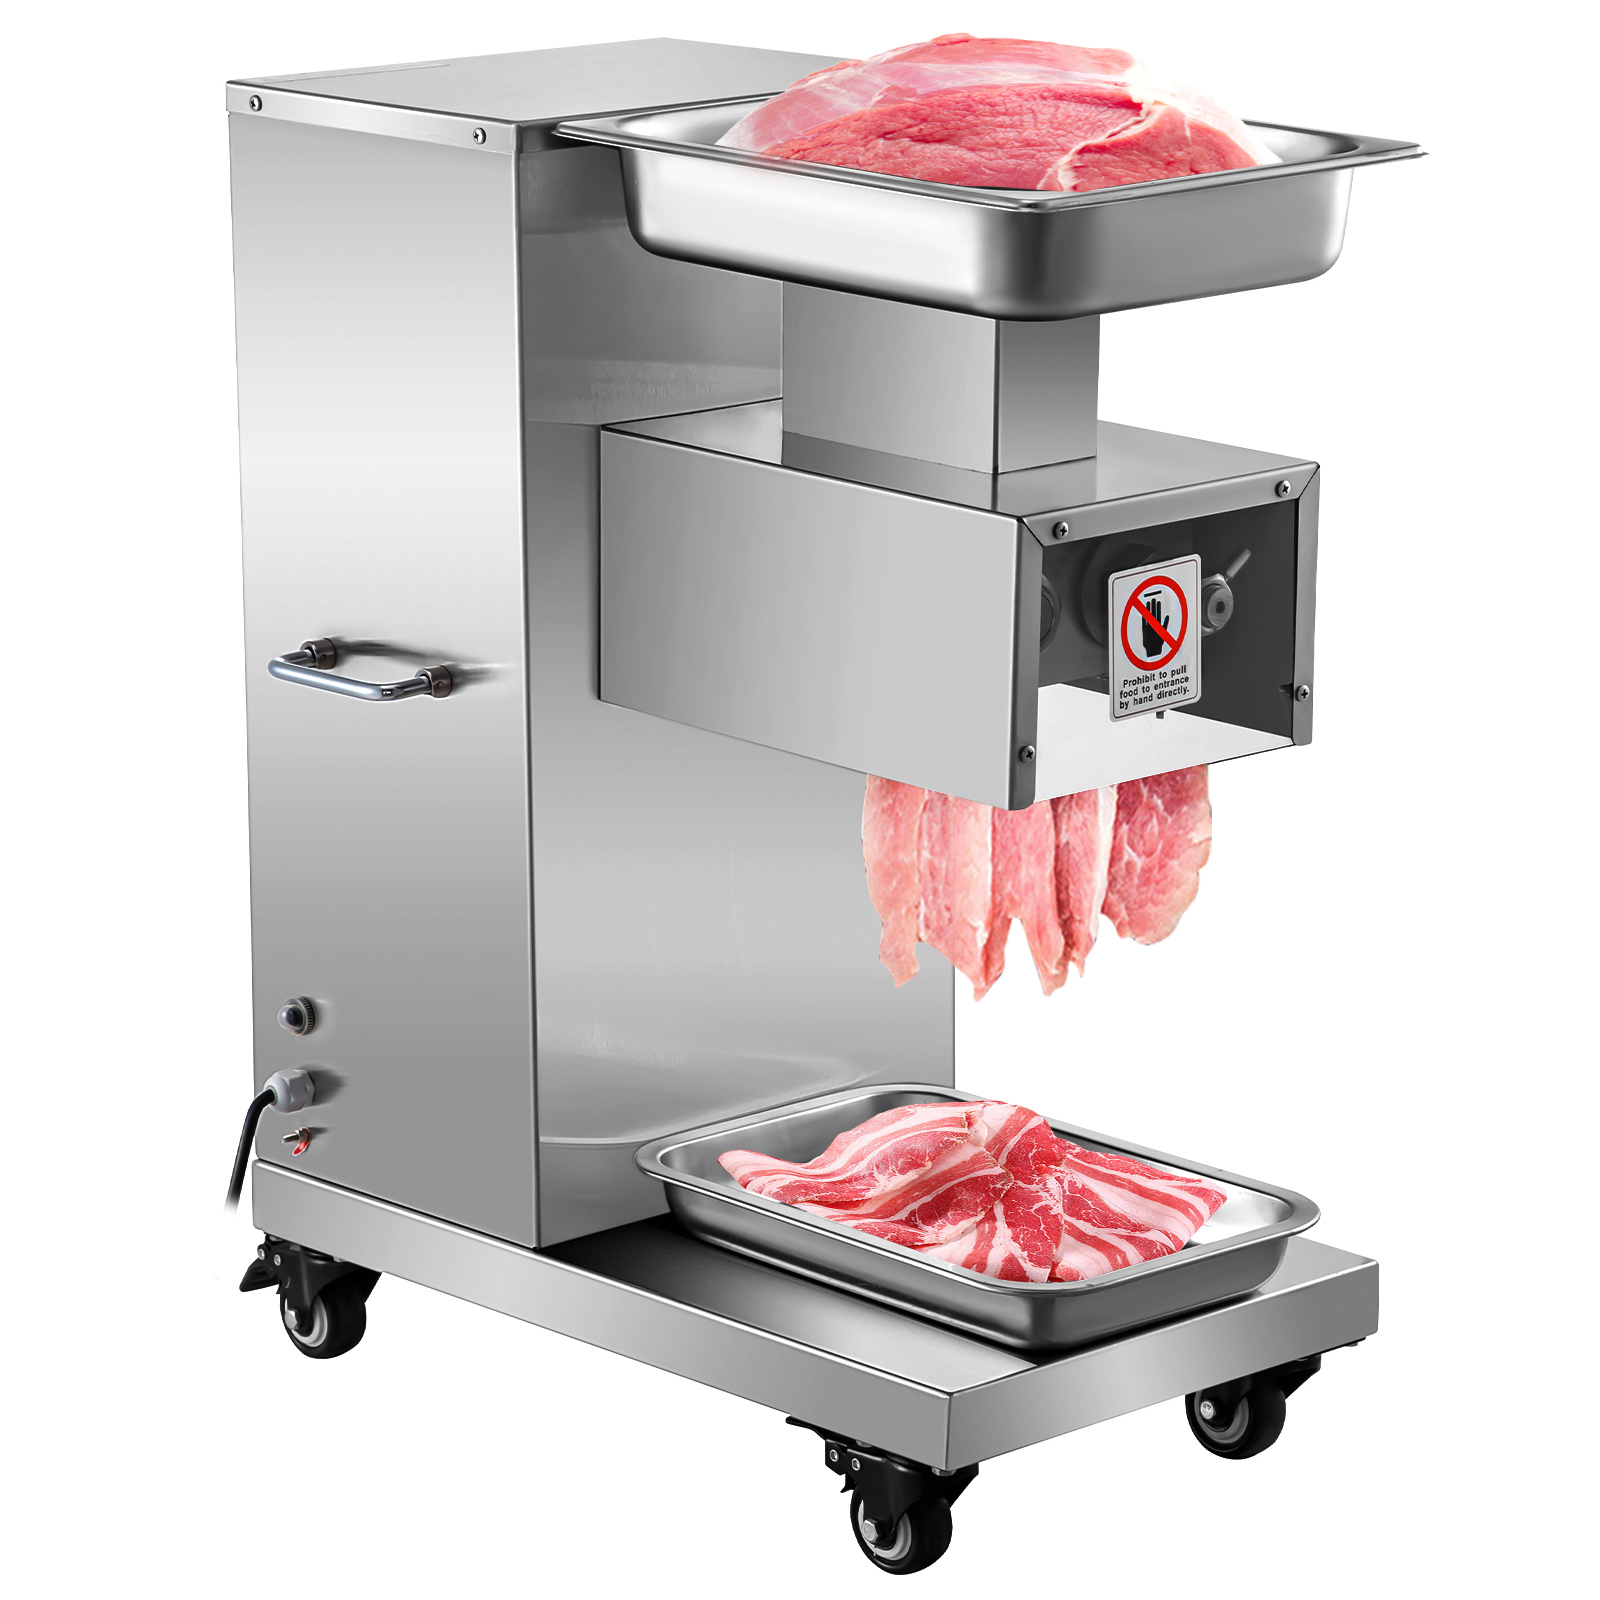 110v 500kg Output Meat Cutting Machine Meat Cutter Slicer With Blade 750w от Vevor Many GEOs